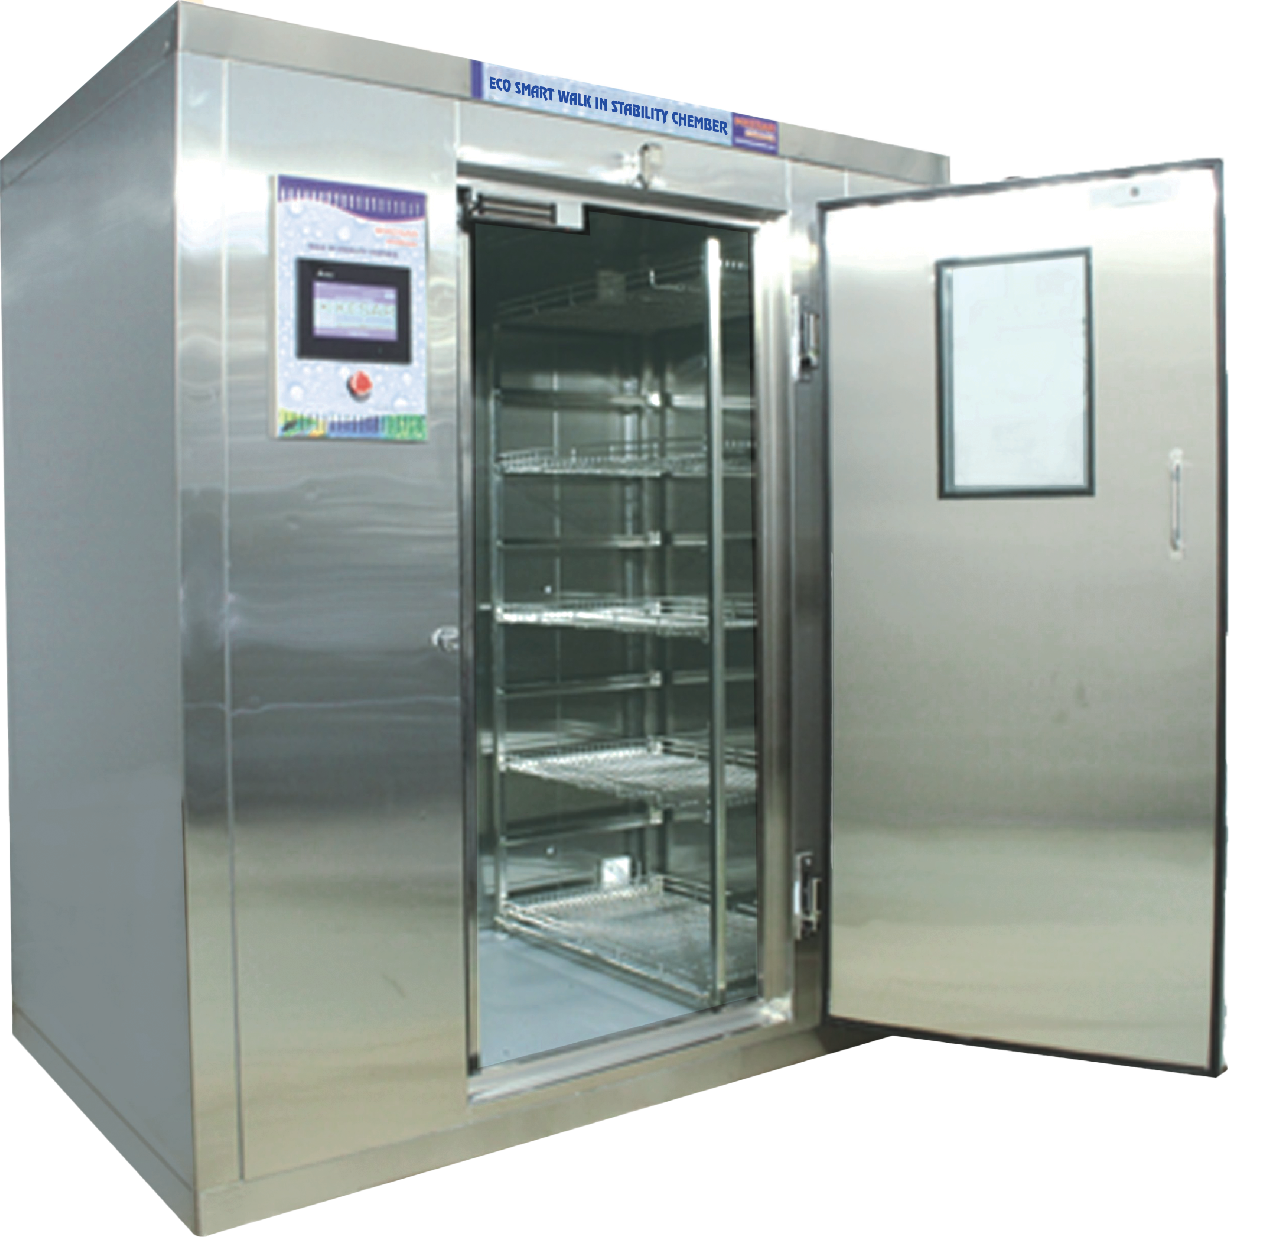 Kesar control is a manufacturer of cold chamber, walk in stability chamber, bod incubator, etc